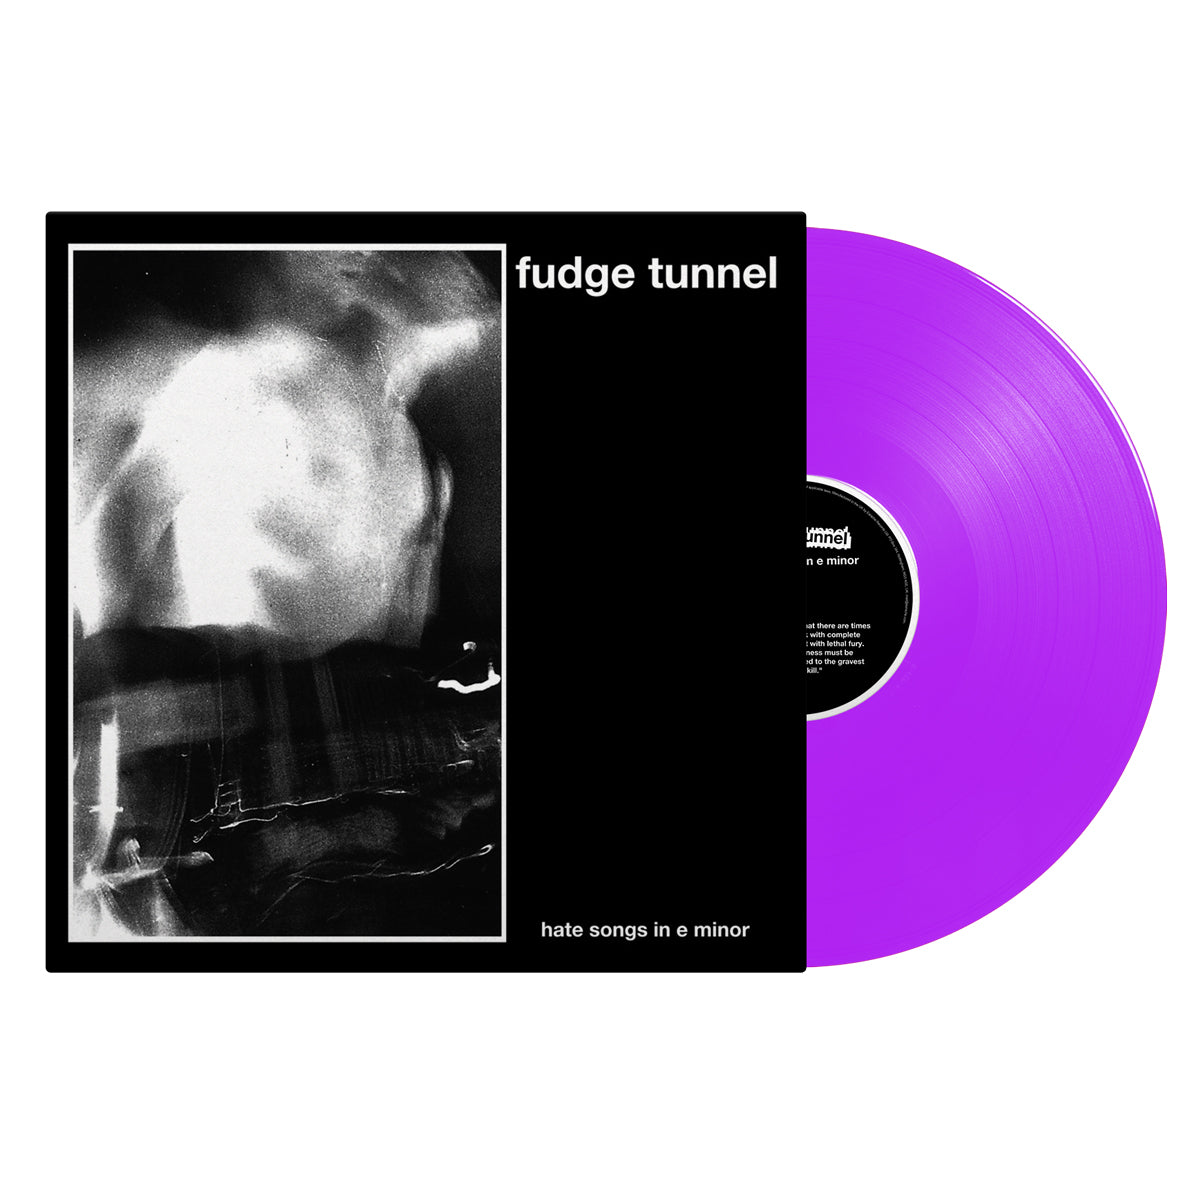 Fudge Tunnel "Hate Songs In E Minor" FDR Purple Vinyl (Limited to 300 Copies)